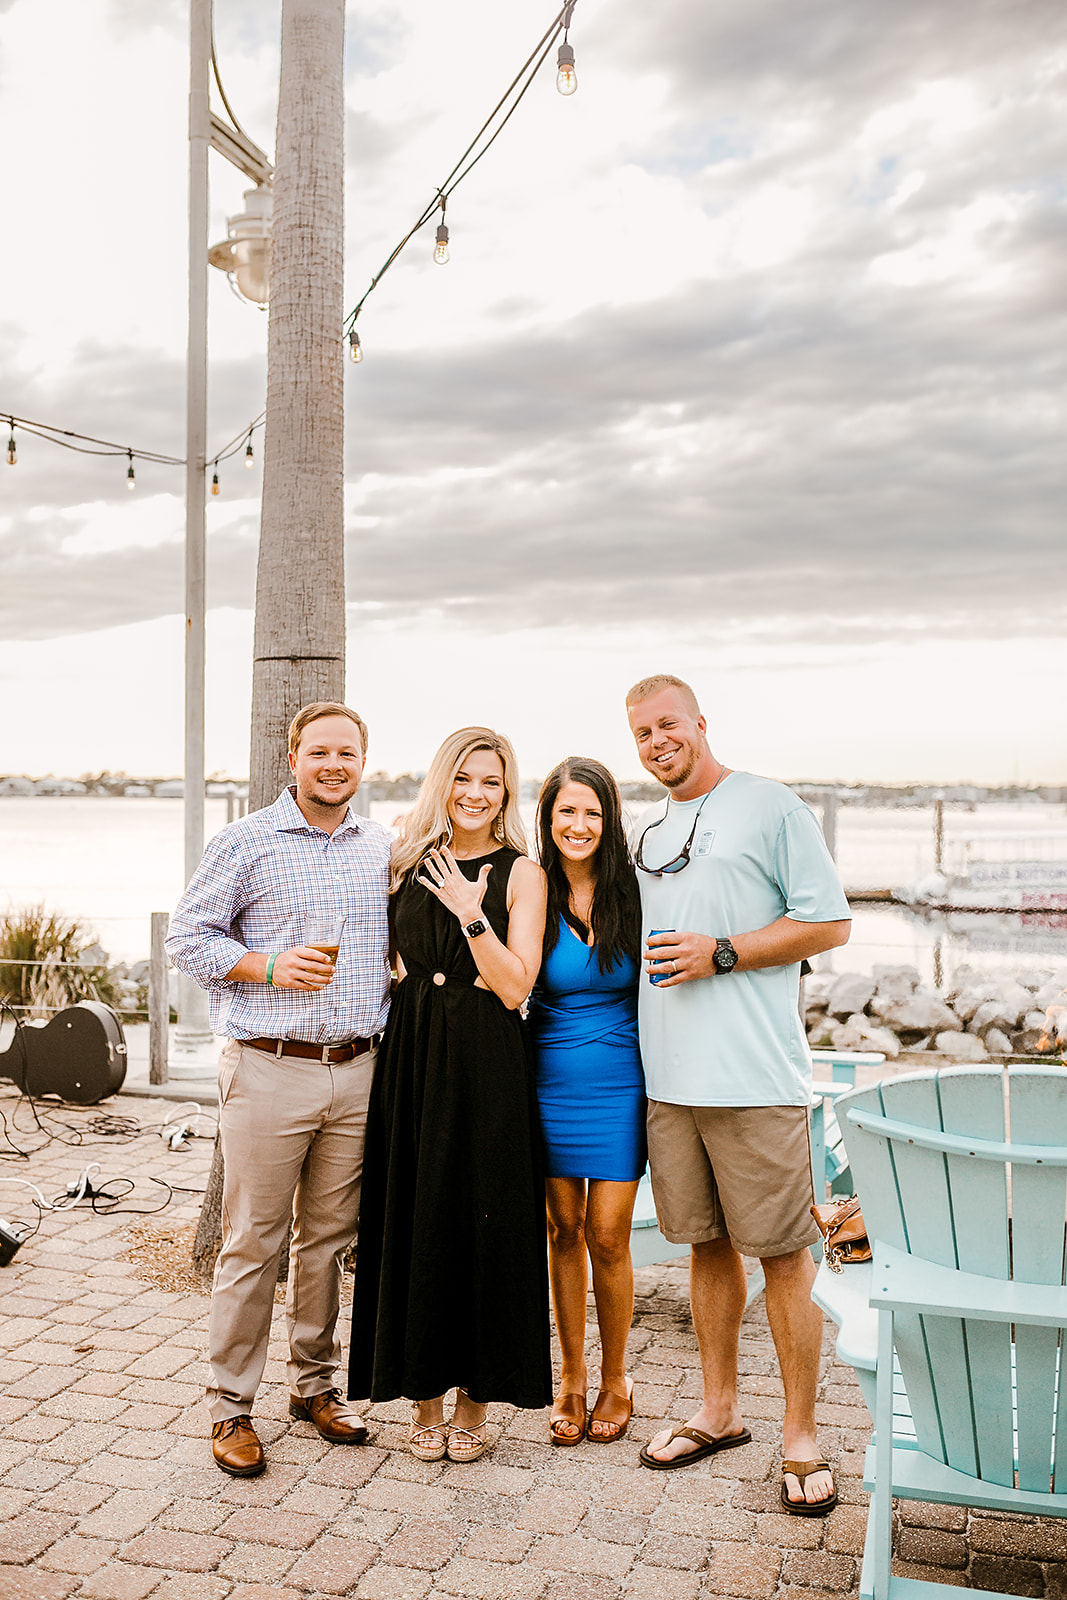 Surprise Proposal Party at Cobalt Restaurant at the Caribe Resort in Orange Beach